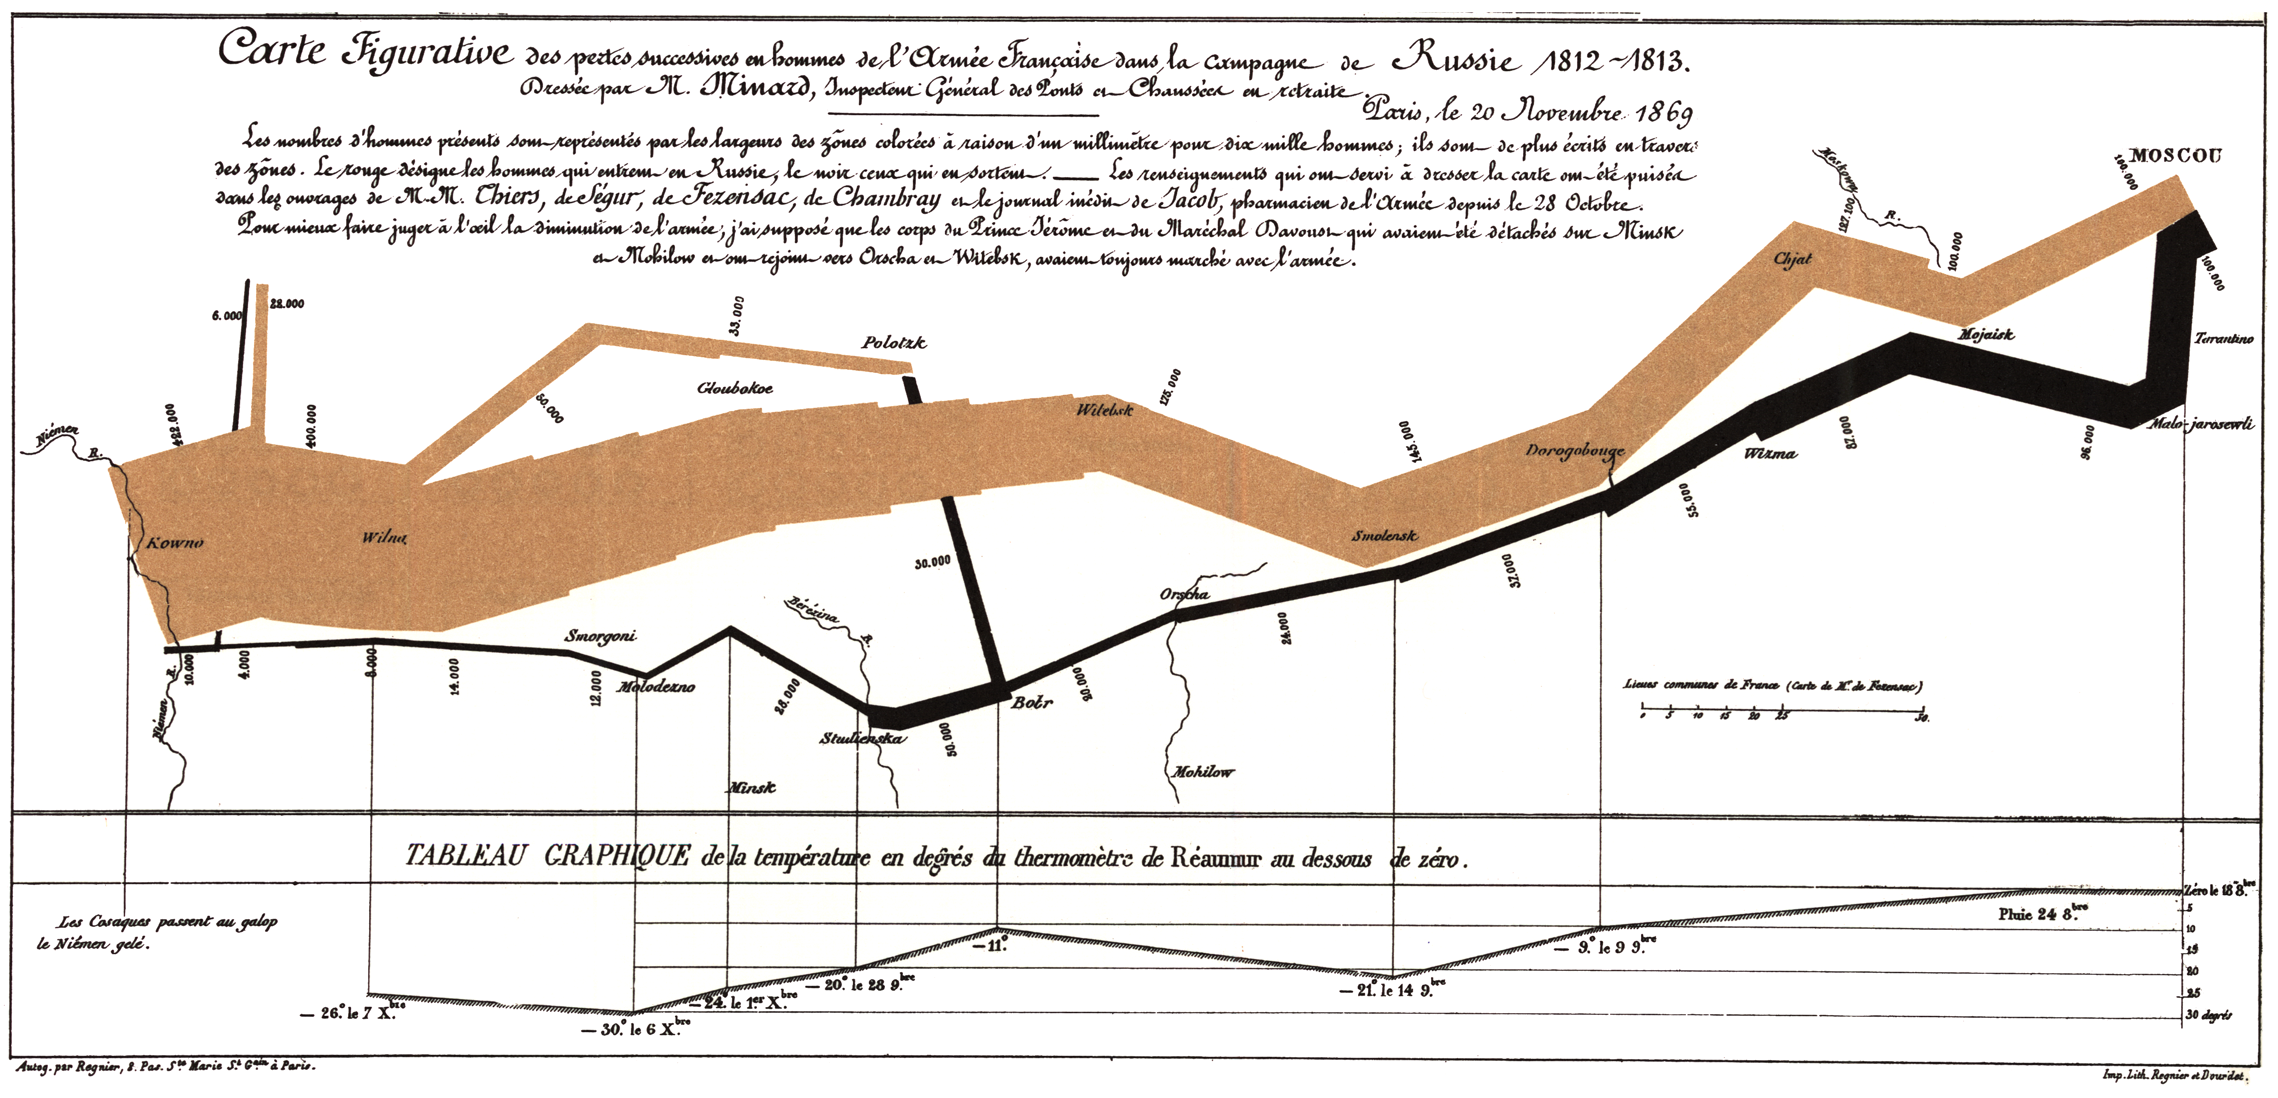 Analysis Of Napoleons Russian Campaign In Light Of Charles Minard